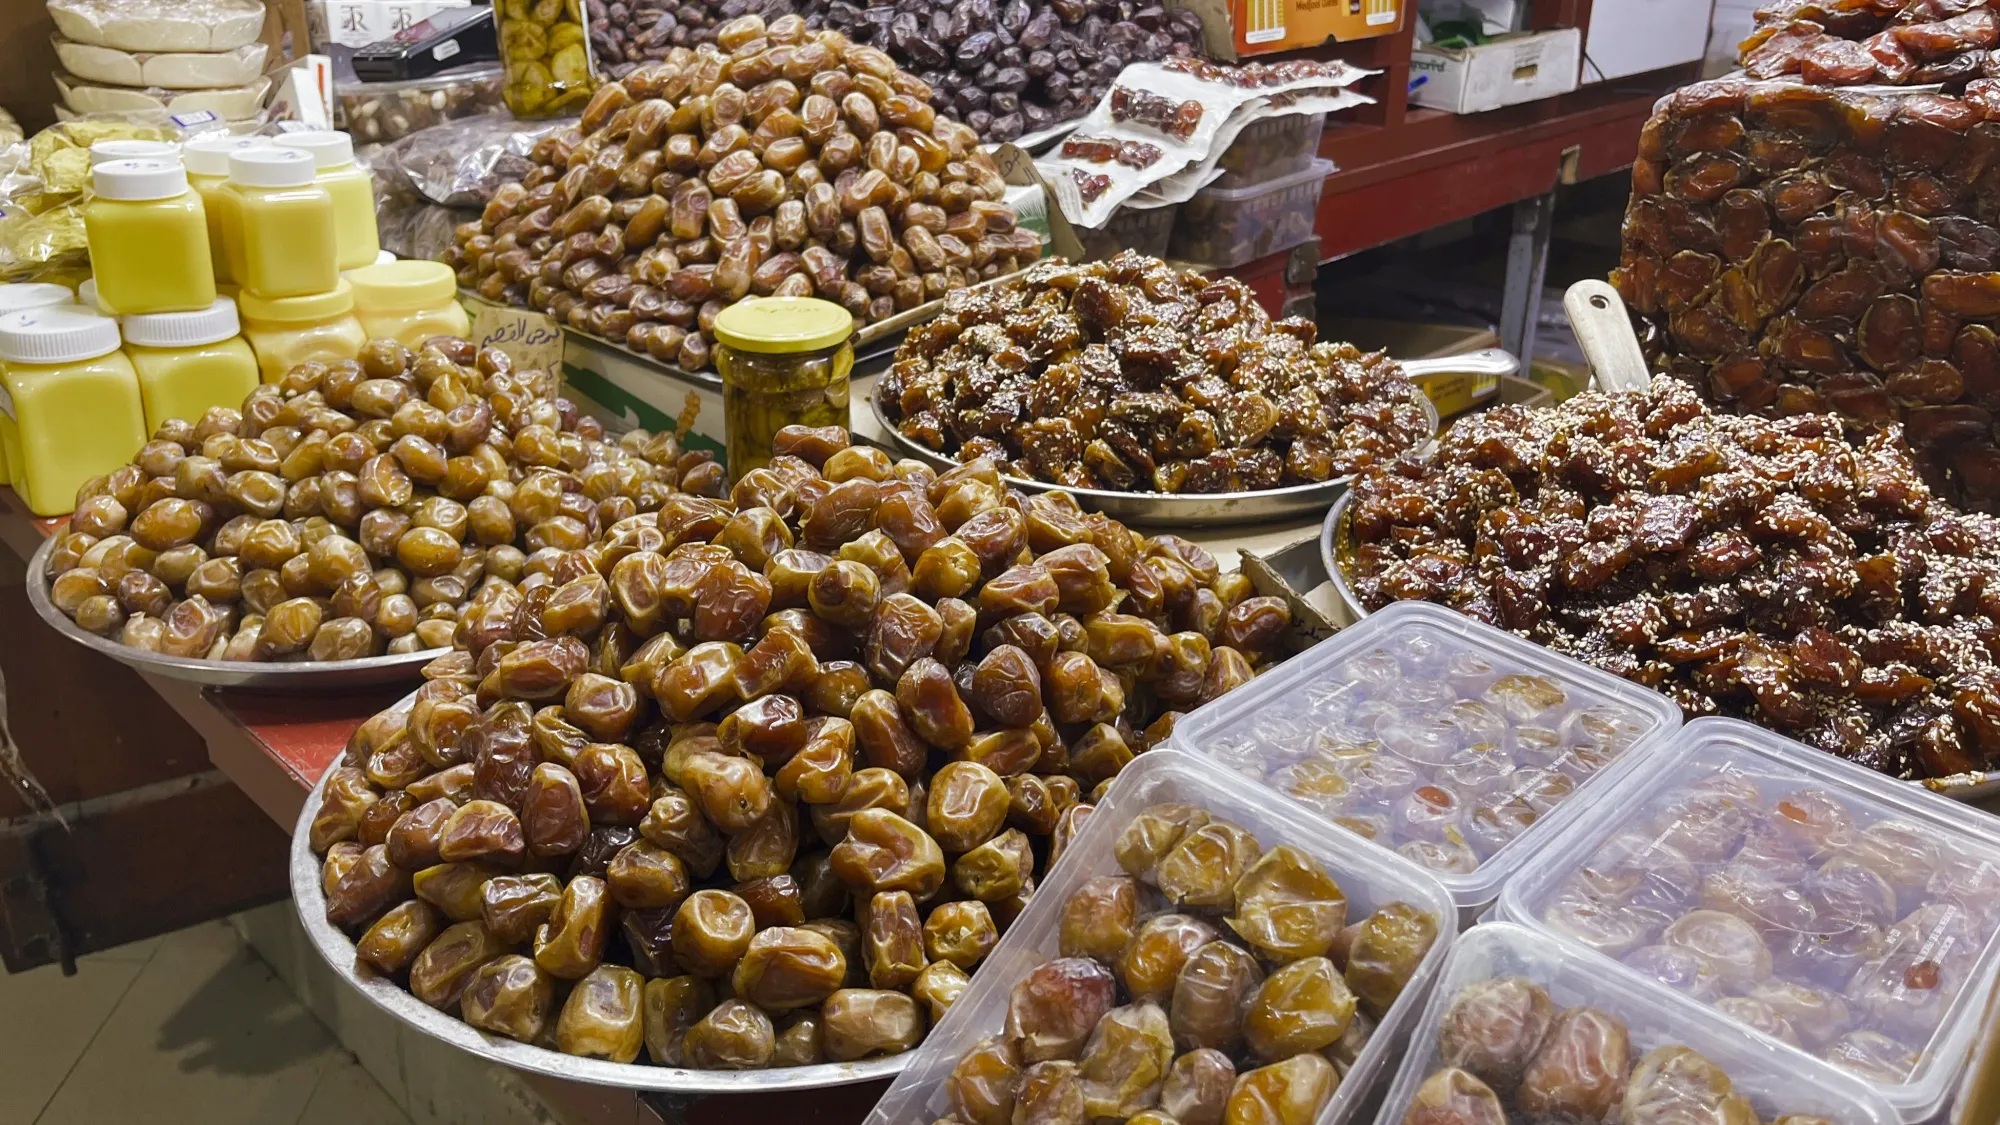 Bowls filled with different varieties and flavors of dates